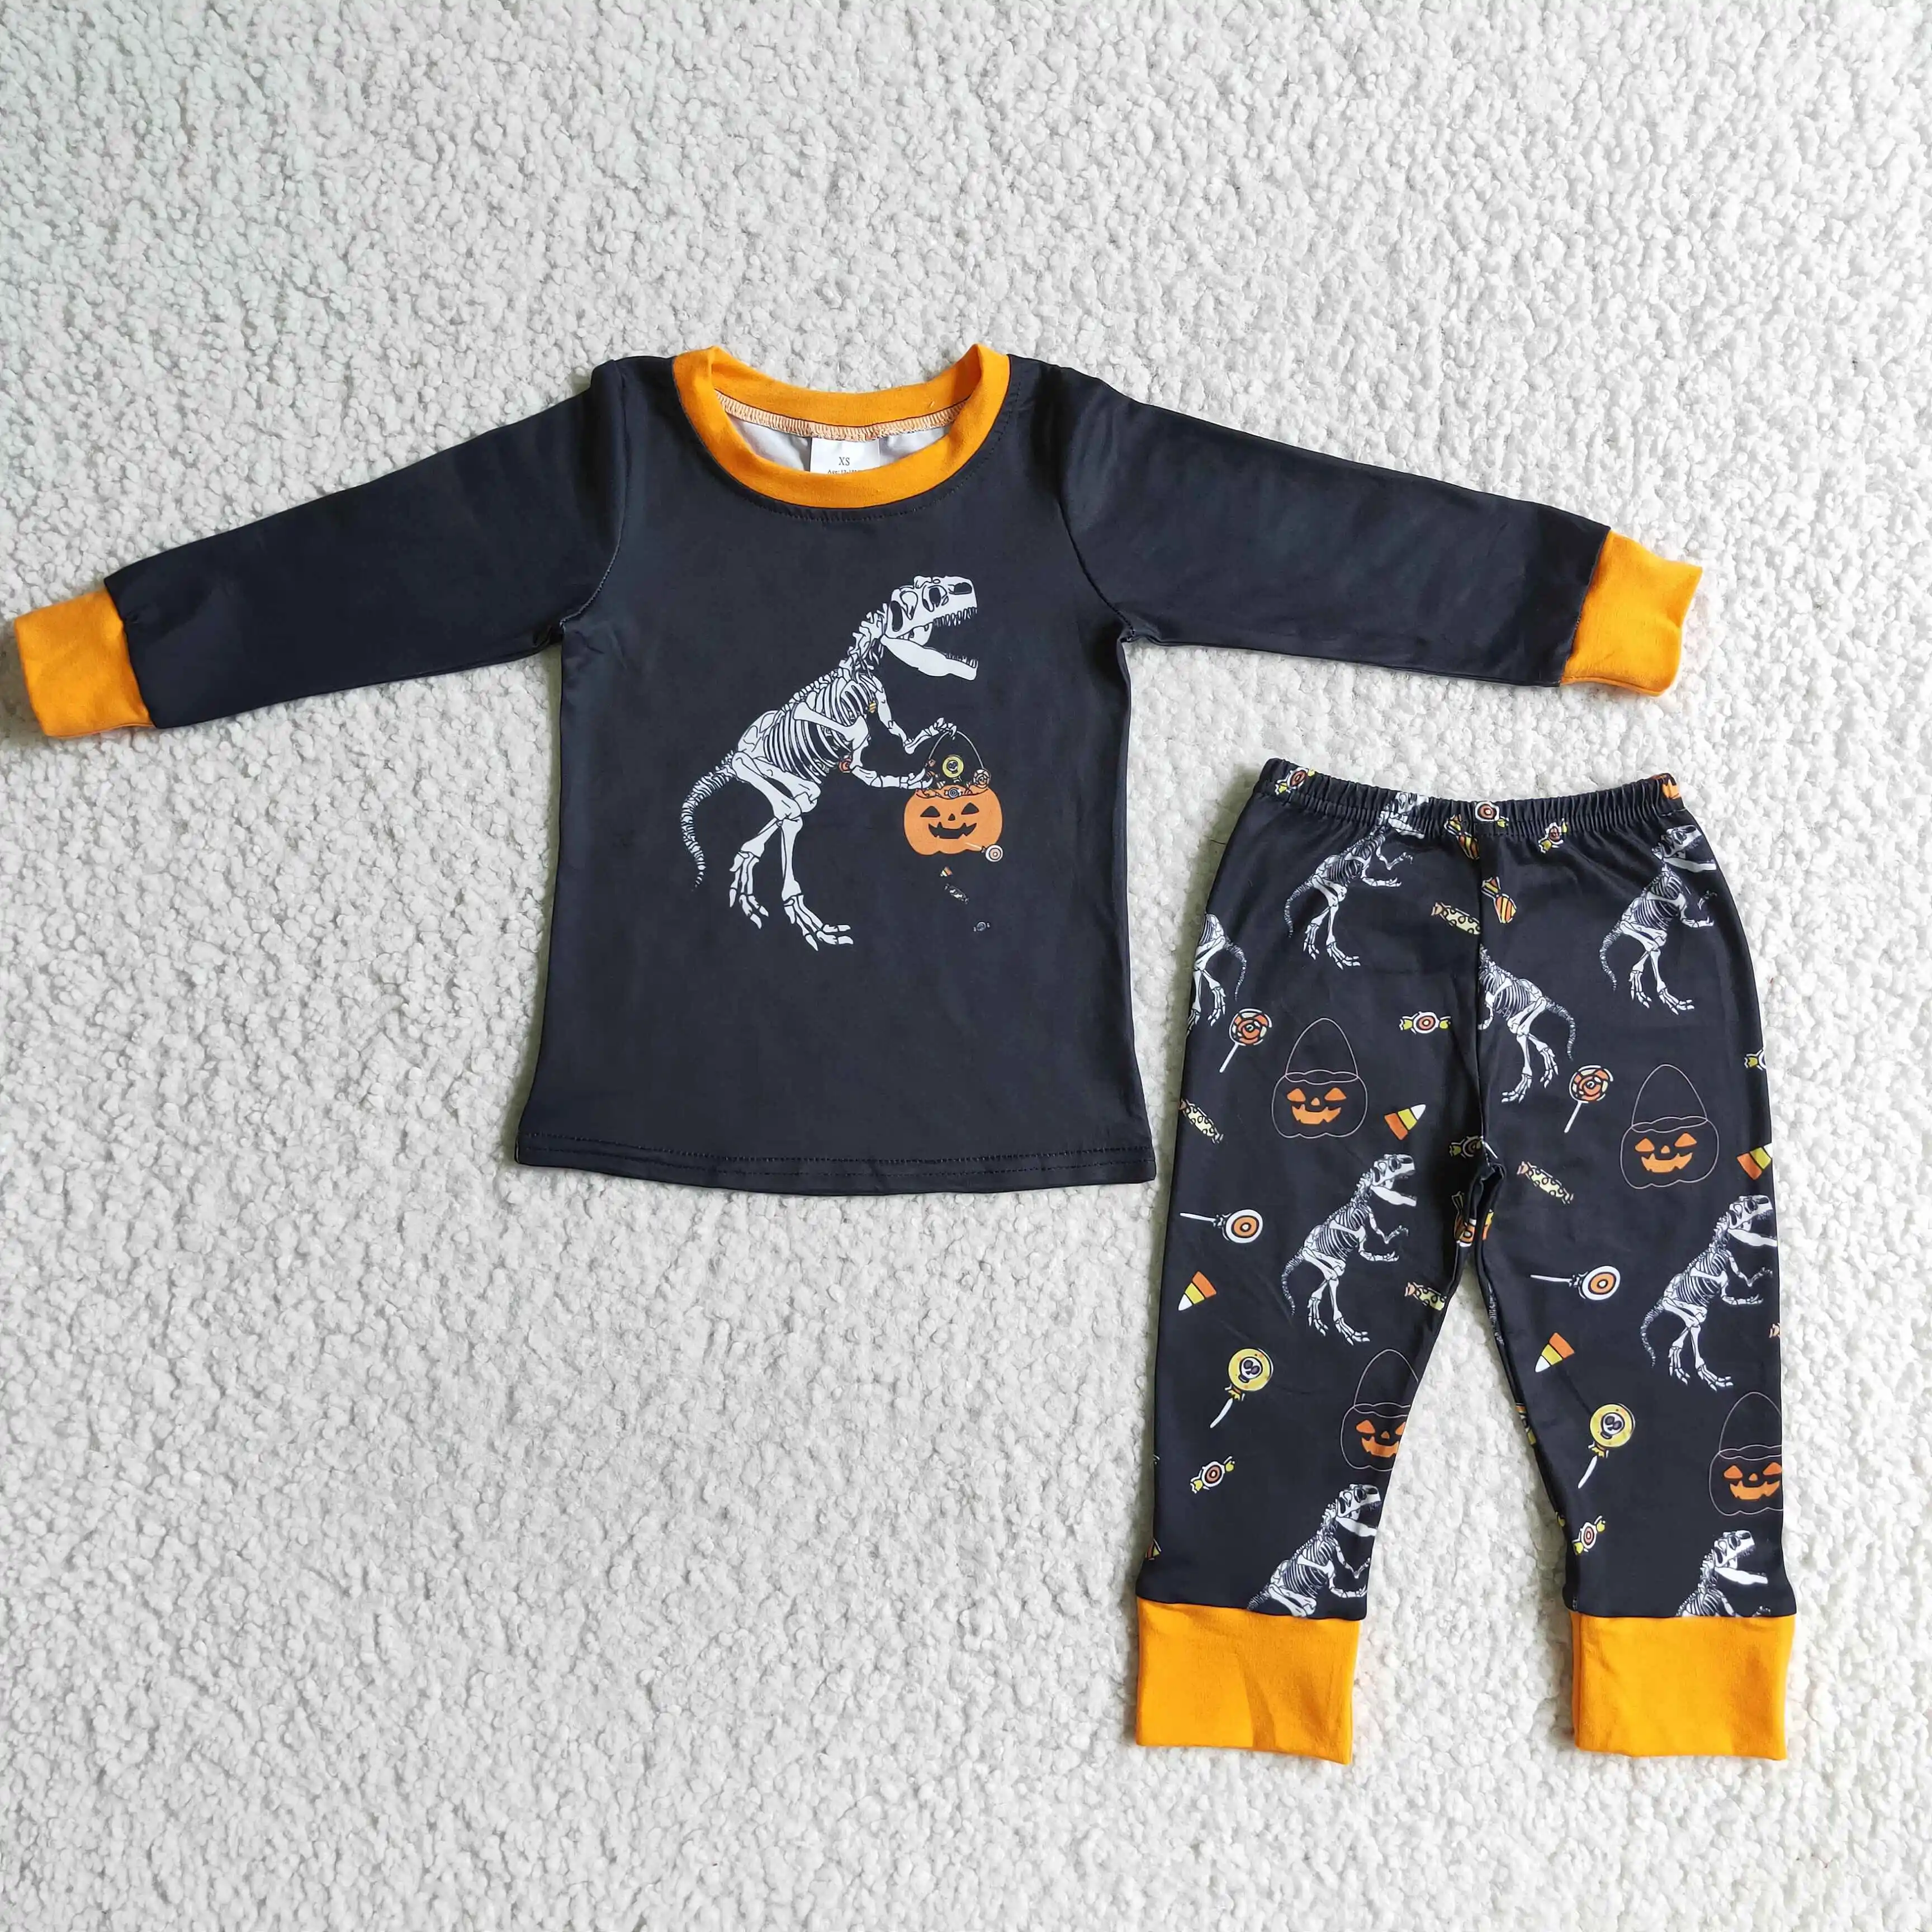 

Toddler Boys Halloween Dinosaur Clothing Kids Boutique Pumpkin Outfits Shirt black Joggers Sets Children Ready to ship Clothes